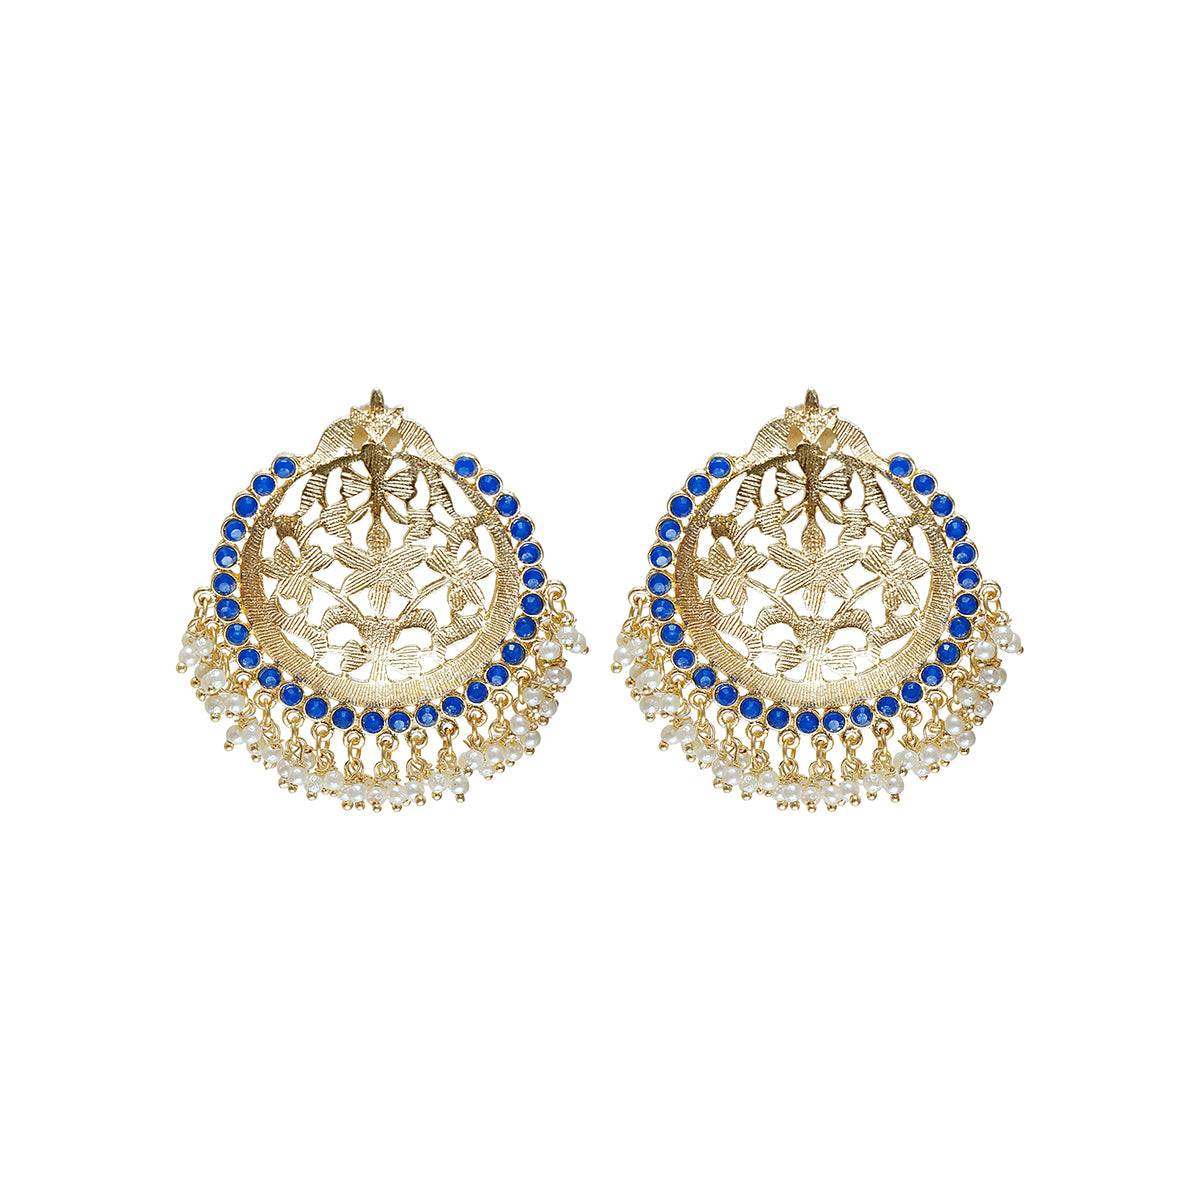 Big blue gold and white stud earrings as seen on ramp at NYFW 2021 . Sushma earrings from Maheswary collection by Veronica Tharmalingam